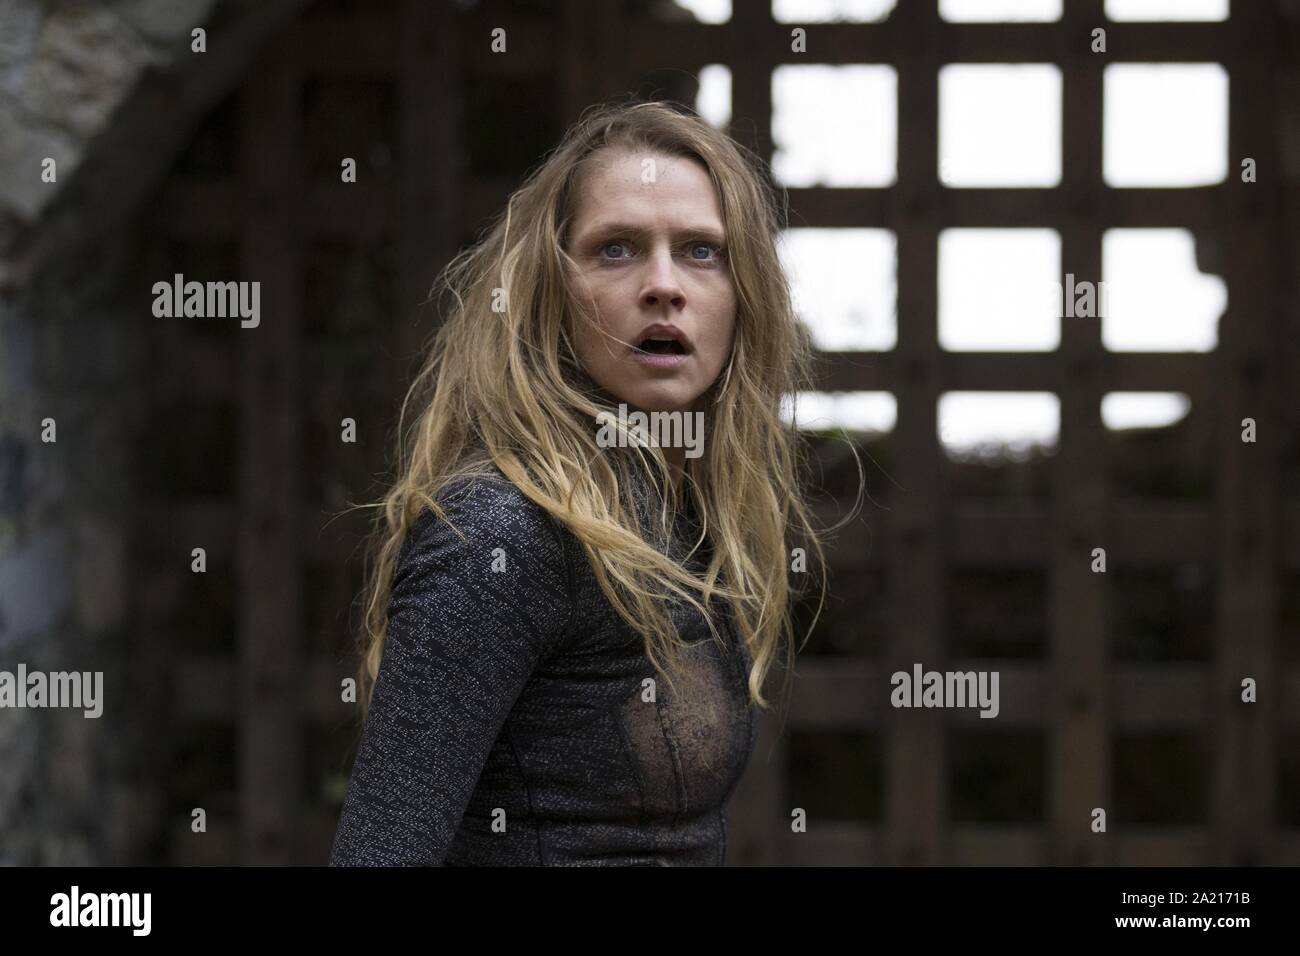 TERESA PALMER in A DISCOVERY OF WITCHES (2018), directed by JUAN CARLOS MEDINA and FARREN BLACKBURN. Credit: AMC / Album Stock Photo